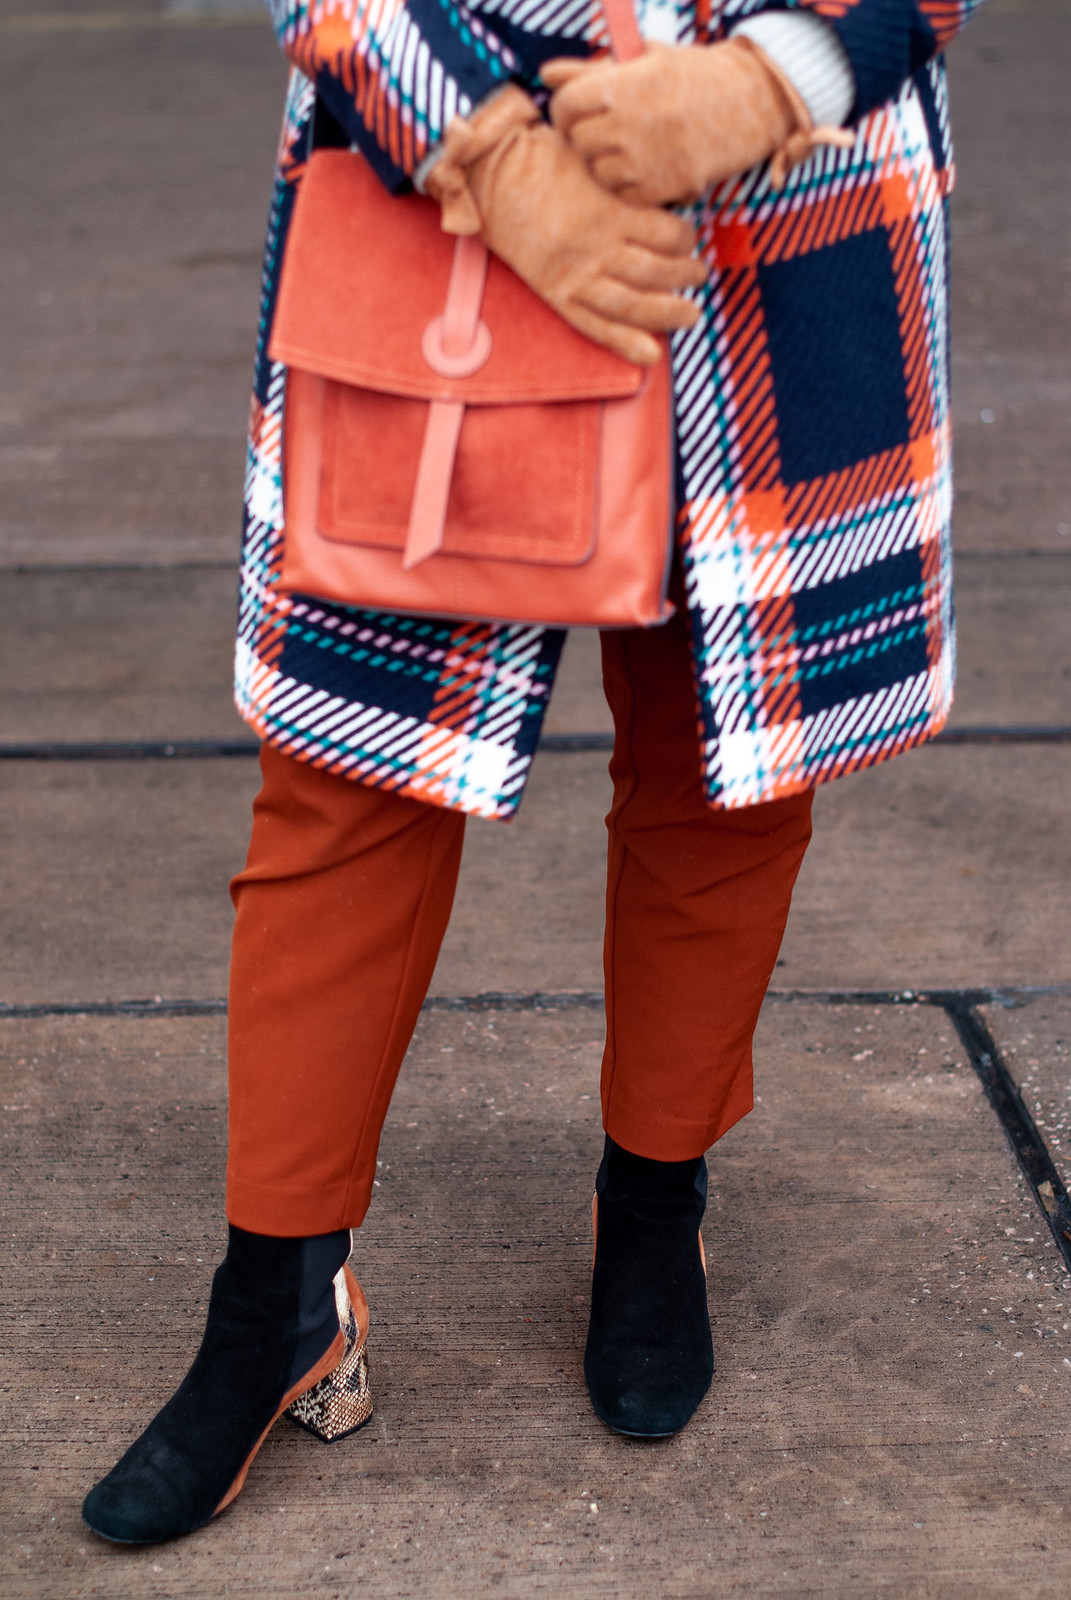 Styling Bold Colour in Winter (orange and blue check coat \ burnt orange trousers \ orange beret \ grey roll neck sweater \ two tone black, tan and snakeskin boots \ orange messenger bag) | Not Dressed As Lamb, over 40 style blog